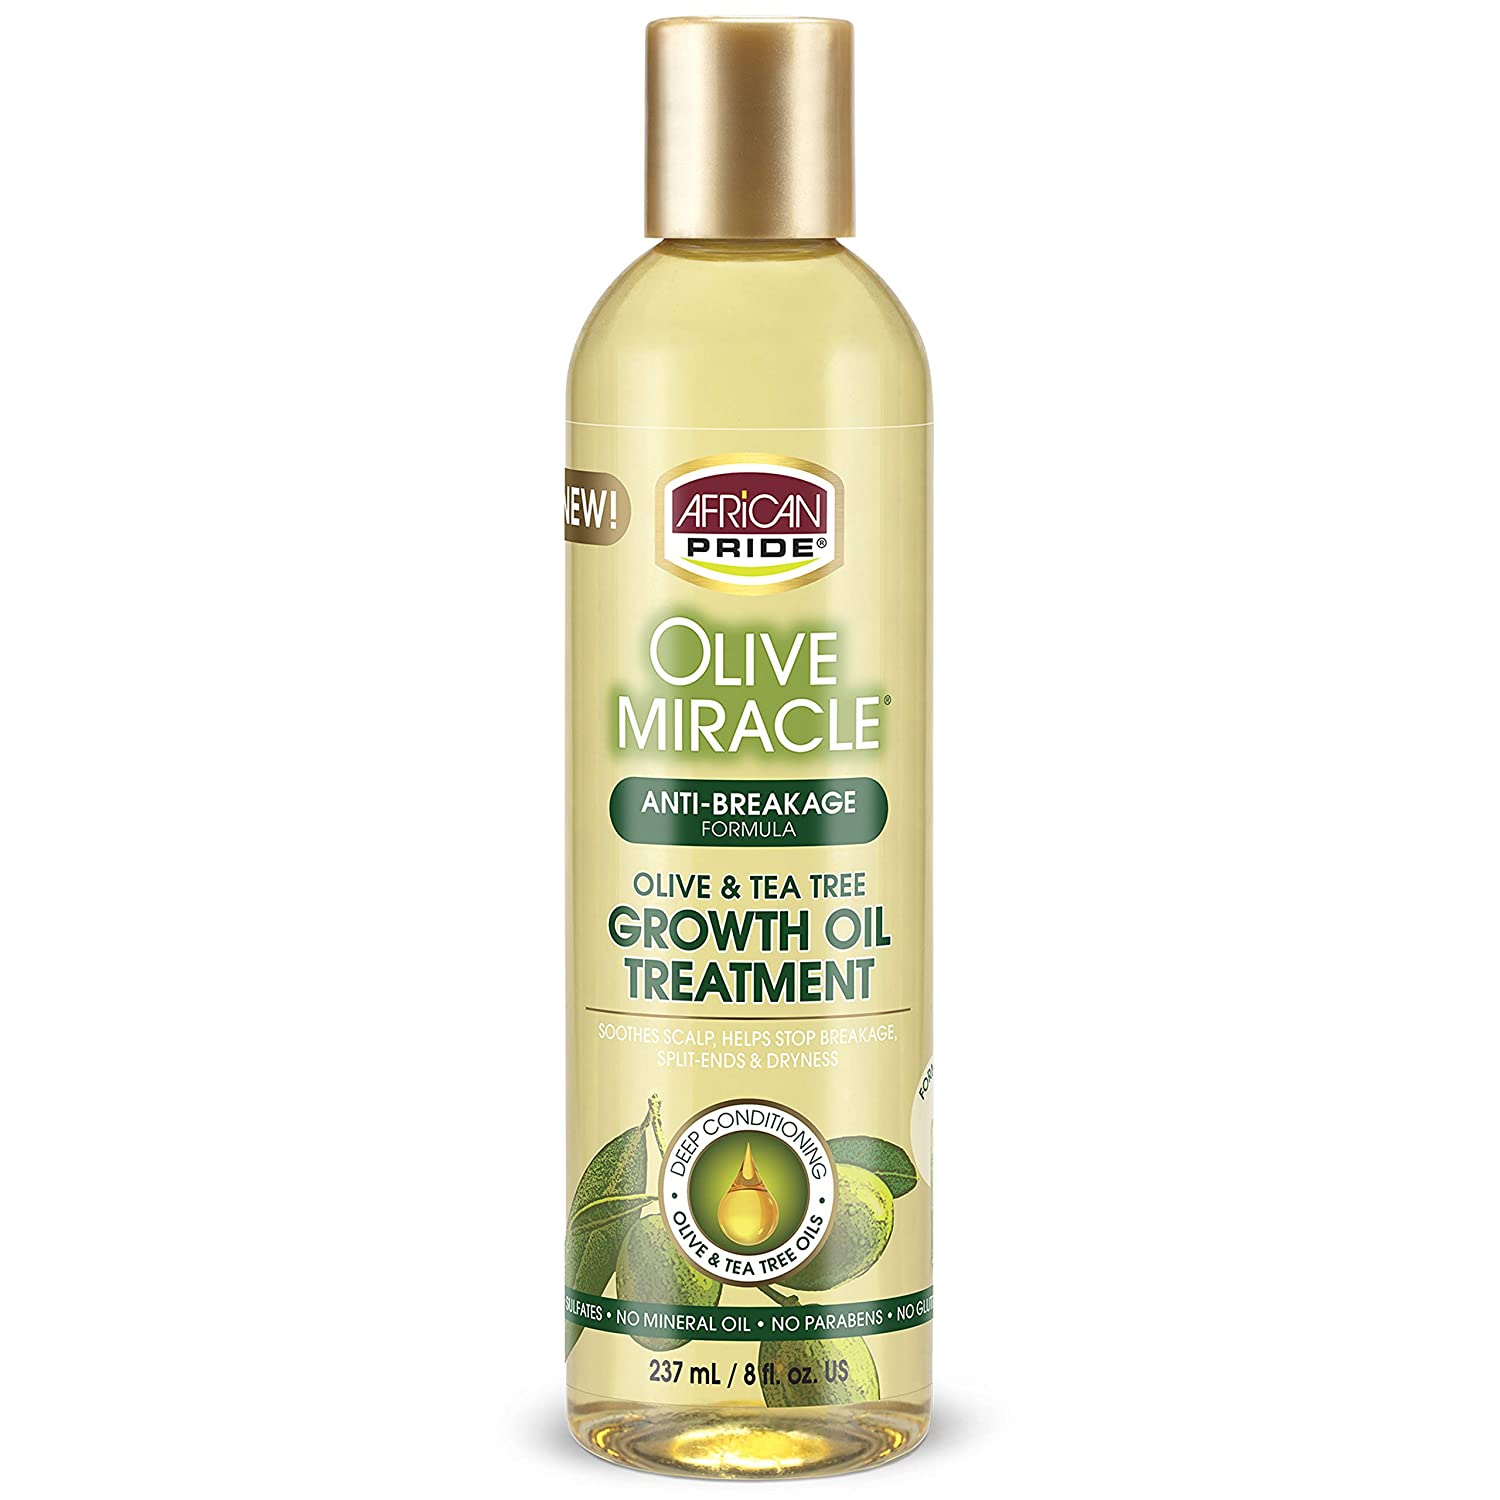 African PRIDE Olive Miracle Growth Oil Treatment-African Pride- Hive Beauty Supply